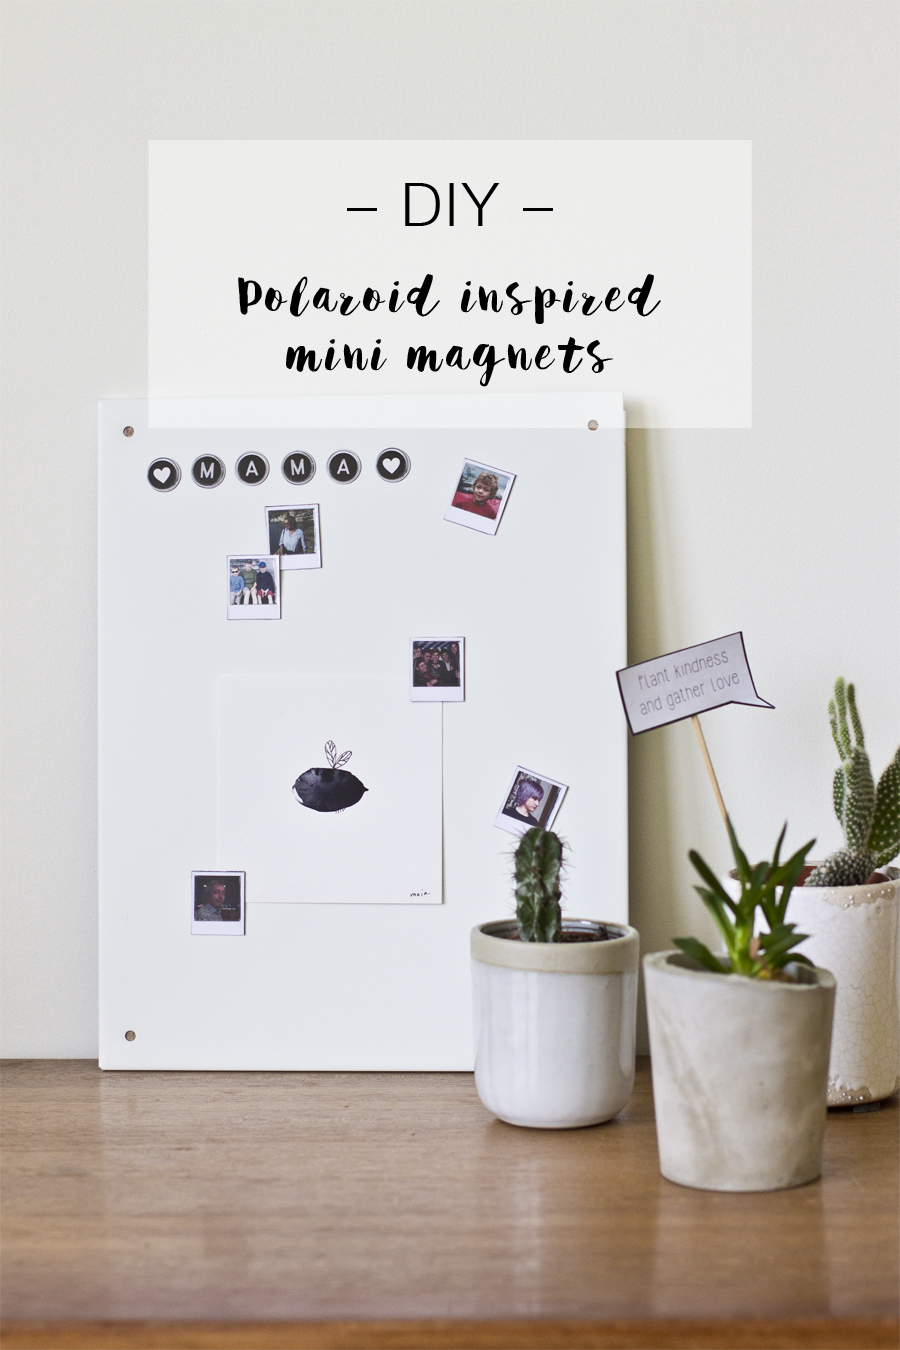 Polaroid inspired mini magnets DIY | LOOK WHAT I MADE ...